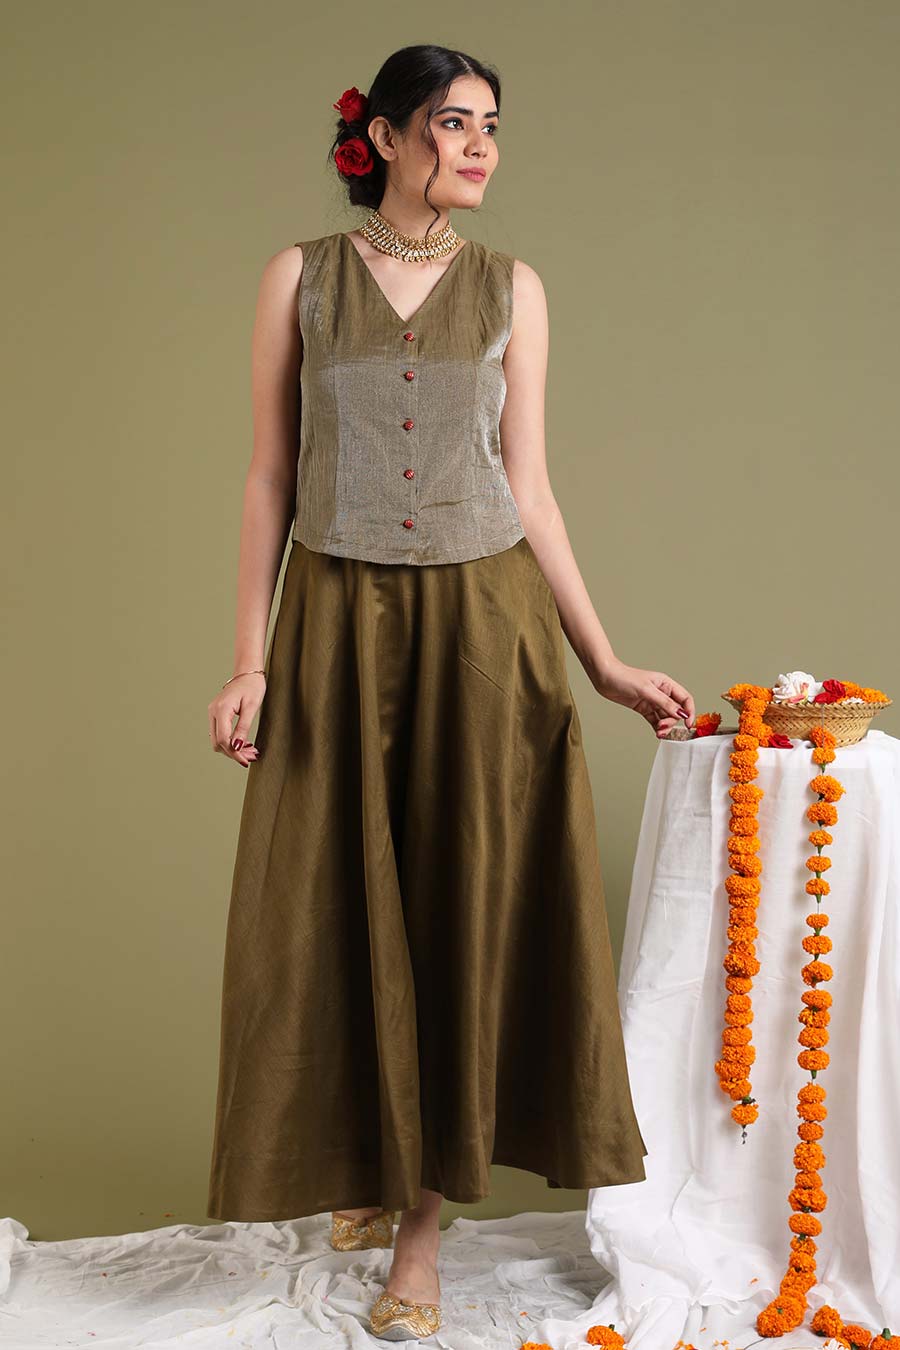 Tabacco Brown Flared Skirt